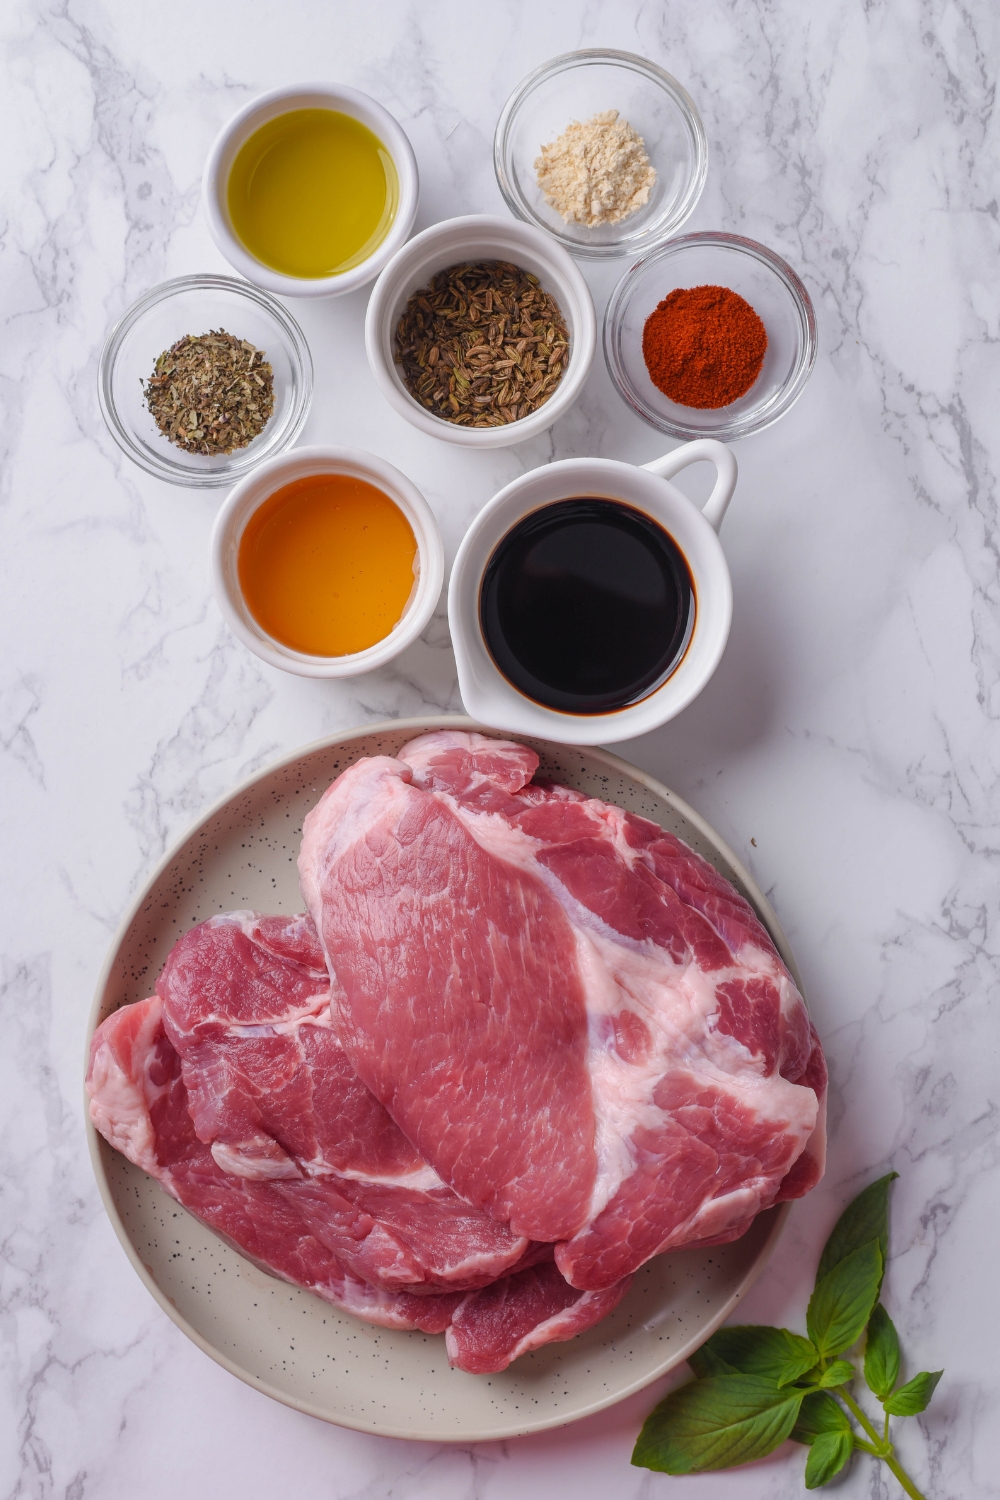 An assortment of ingredients including a plate of raw pork steaks and bowls of soy sauce, oil, spices, and herbs.